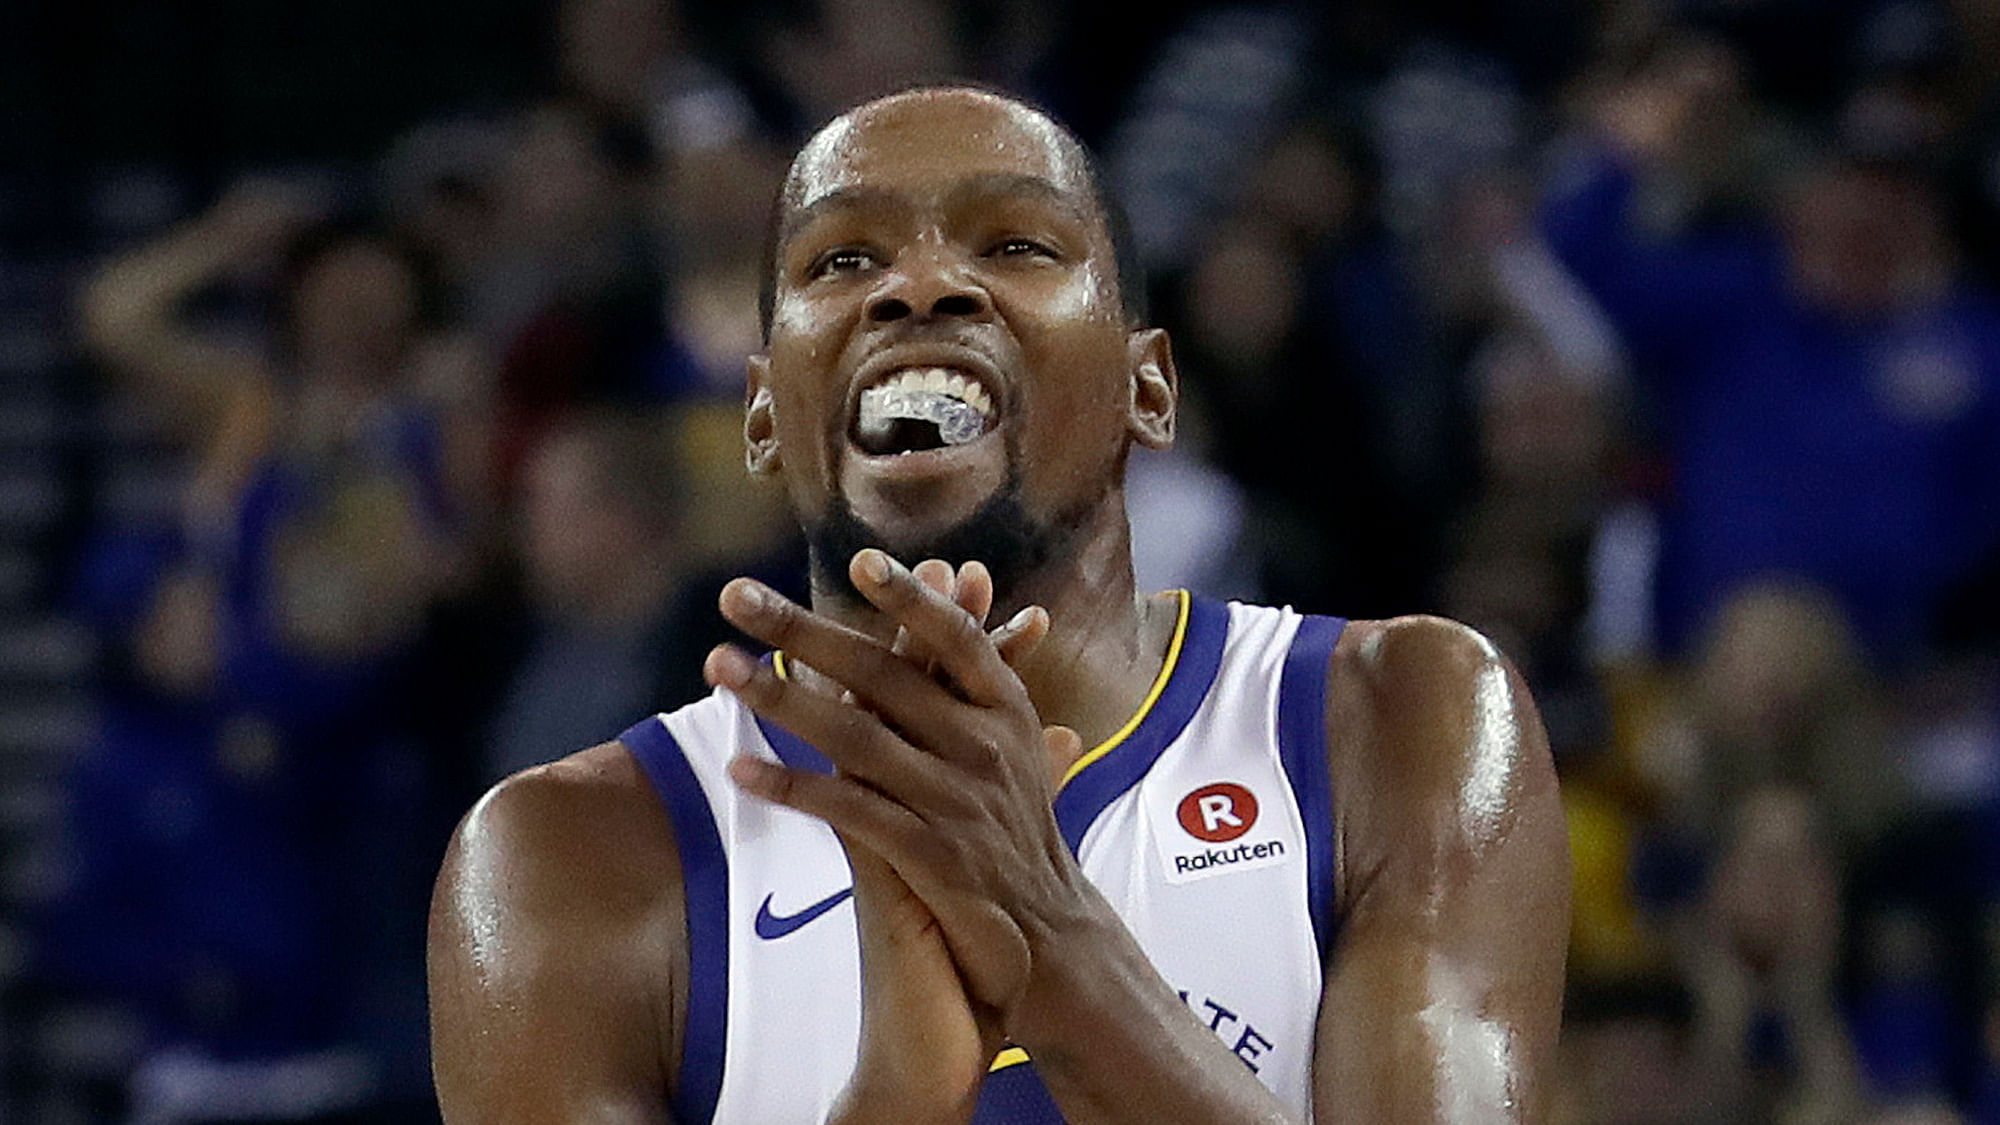 Injured NBA superstar Kevin Durant of the Brooklyn Nets says it’s “hard to keep going right now” as he mourns the death of Los Angeles Lakers legend Kobe Bryant.